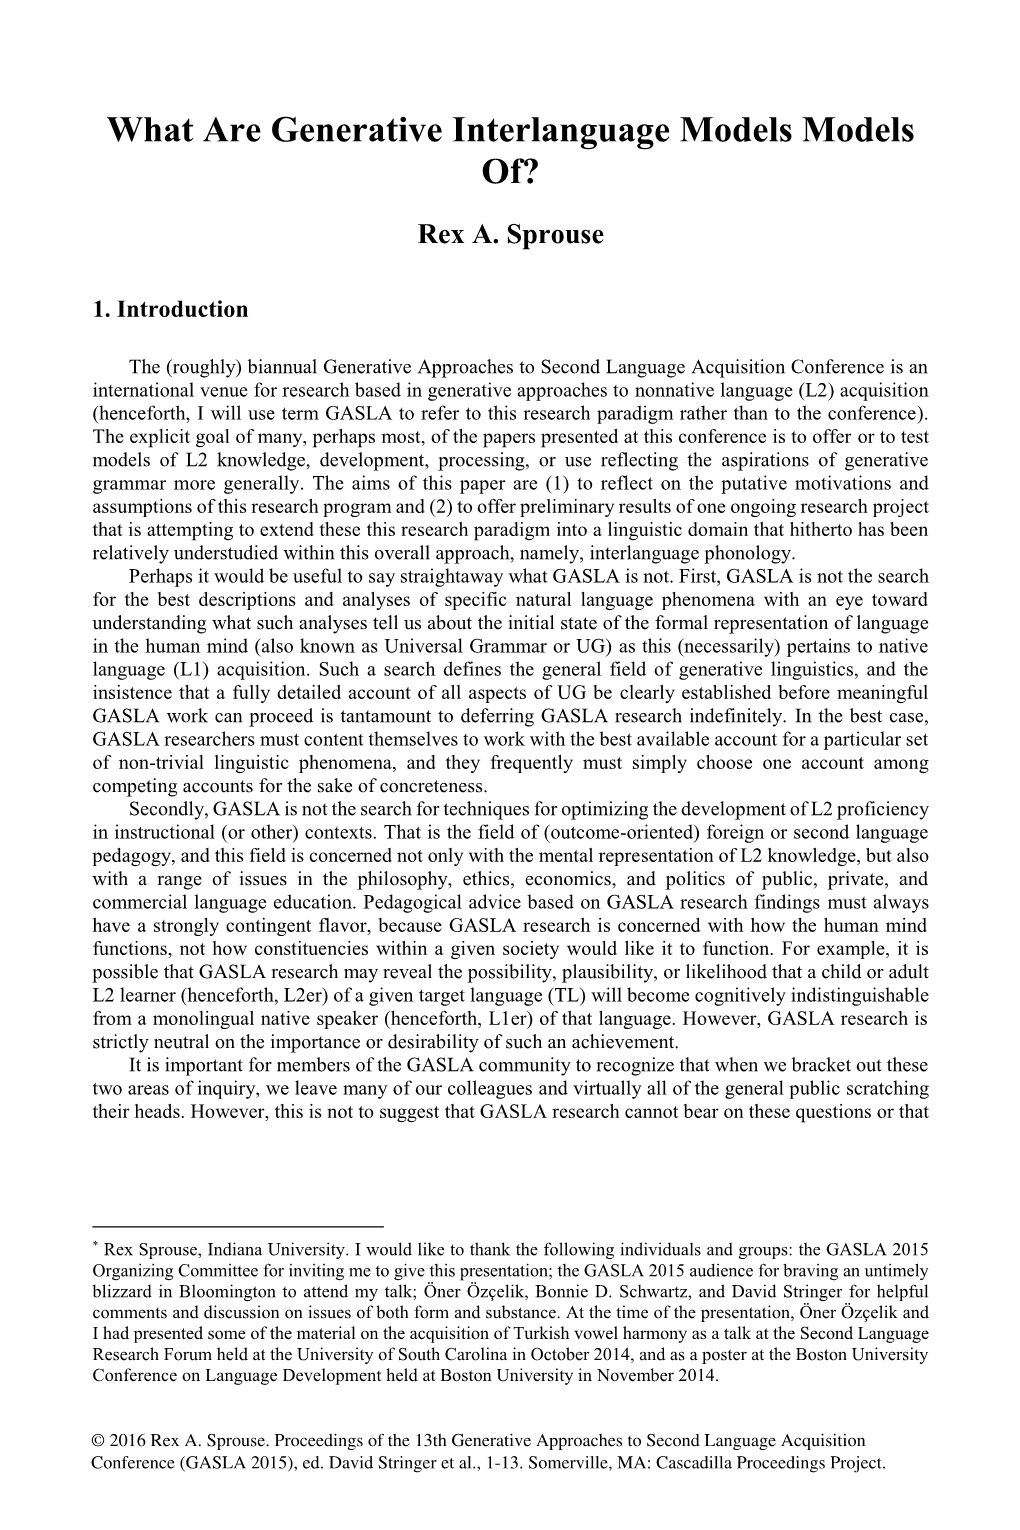 What Are Generative Interlanguage Models Models Of? in Proceedings of the 13Th Generative Approaches to Second Language Acquisition Conference (GASLA 2015), Ed